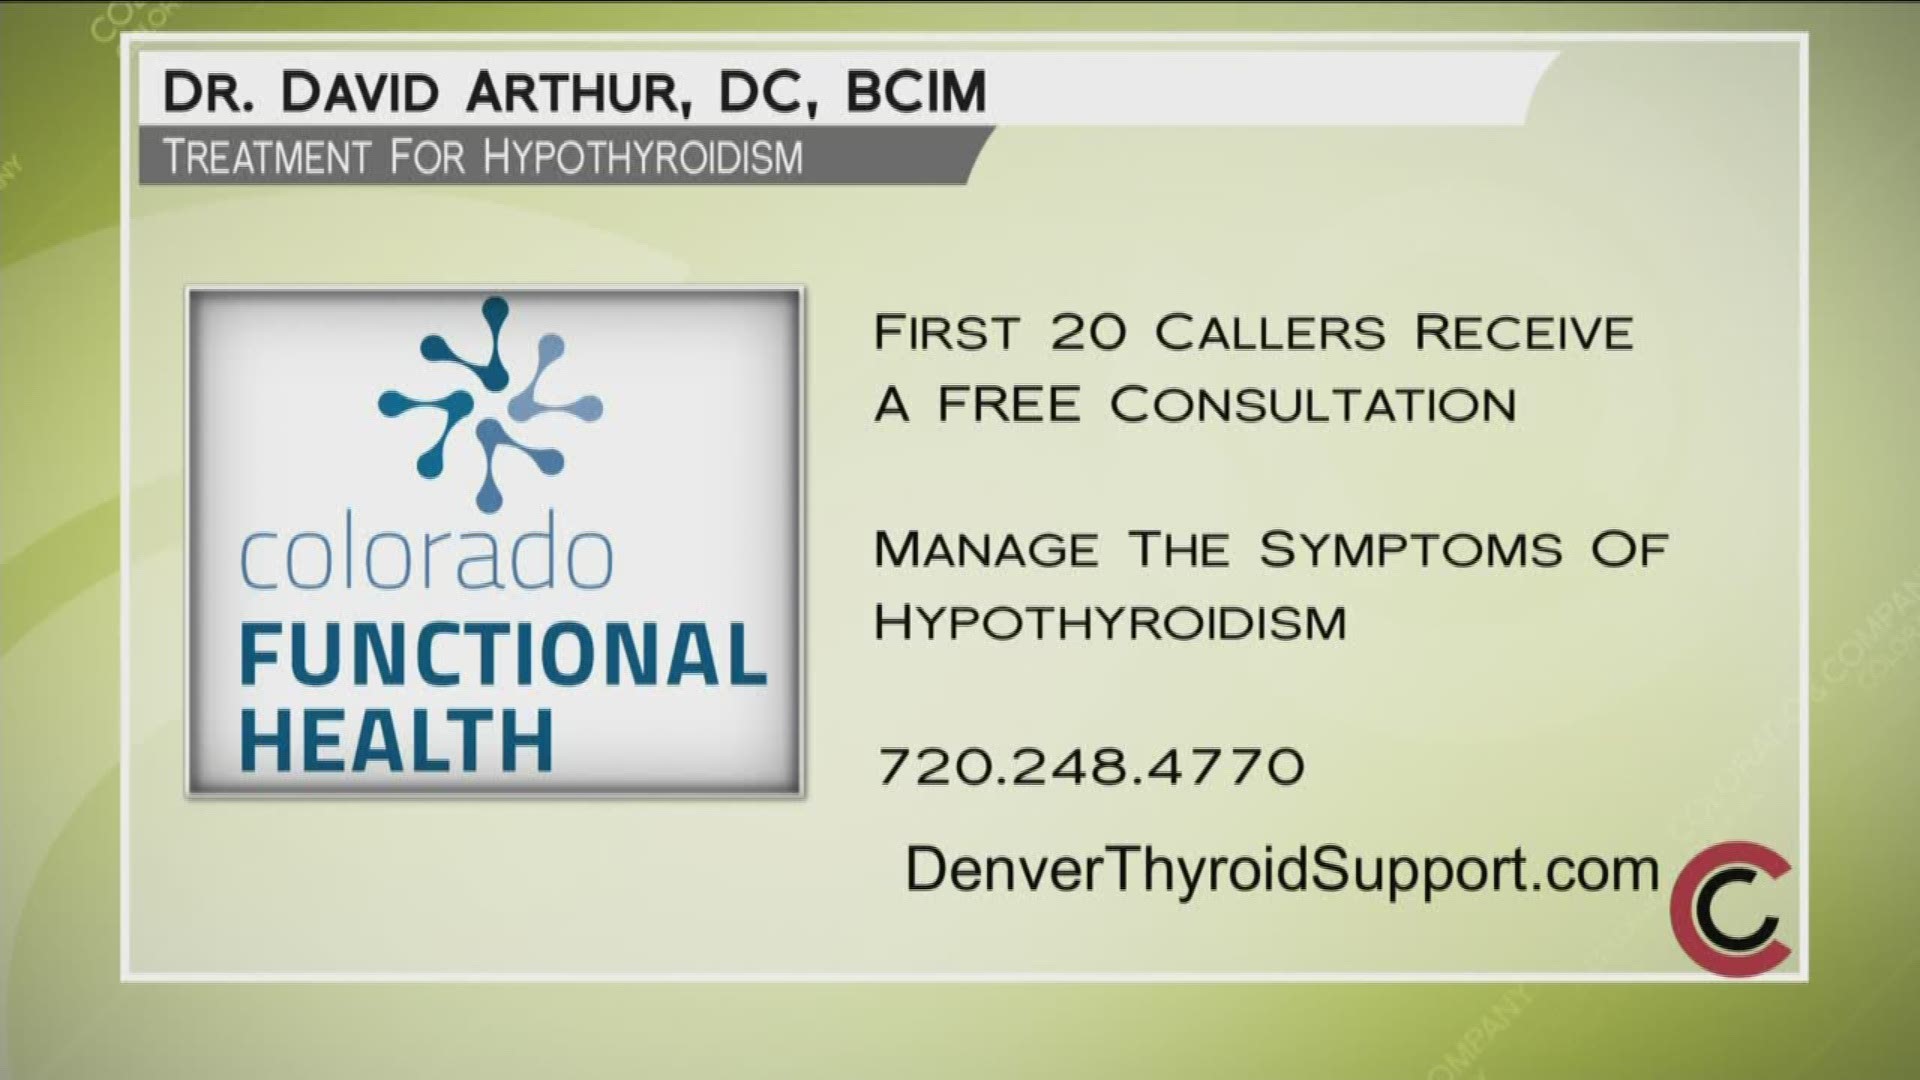 Take advantage of Dr. Arthur’s free initial consultation for the first 20 callers to 720.248.4770. Mention Colorado and Company when you call. This offer is for first-time callers who have been previously diagnosed, and are taking medication for low thyroid. Learn more at www.DenverThyroidSupport.com. 
THIS INTERVIEW HAS COMMERCIAL CONTENT. PRODUCTS AND SERVICES FEATURED APPEAR AS PAID ADVERTISING.